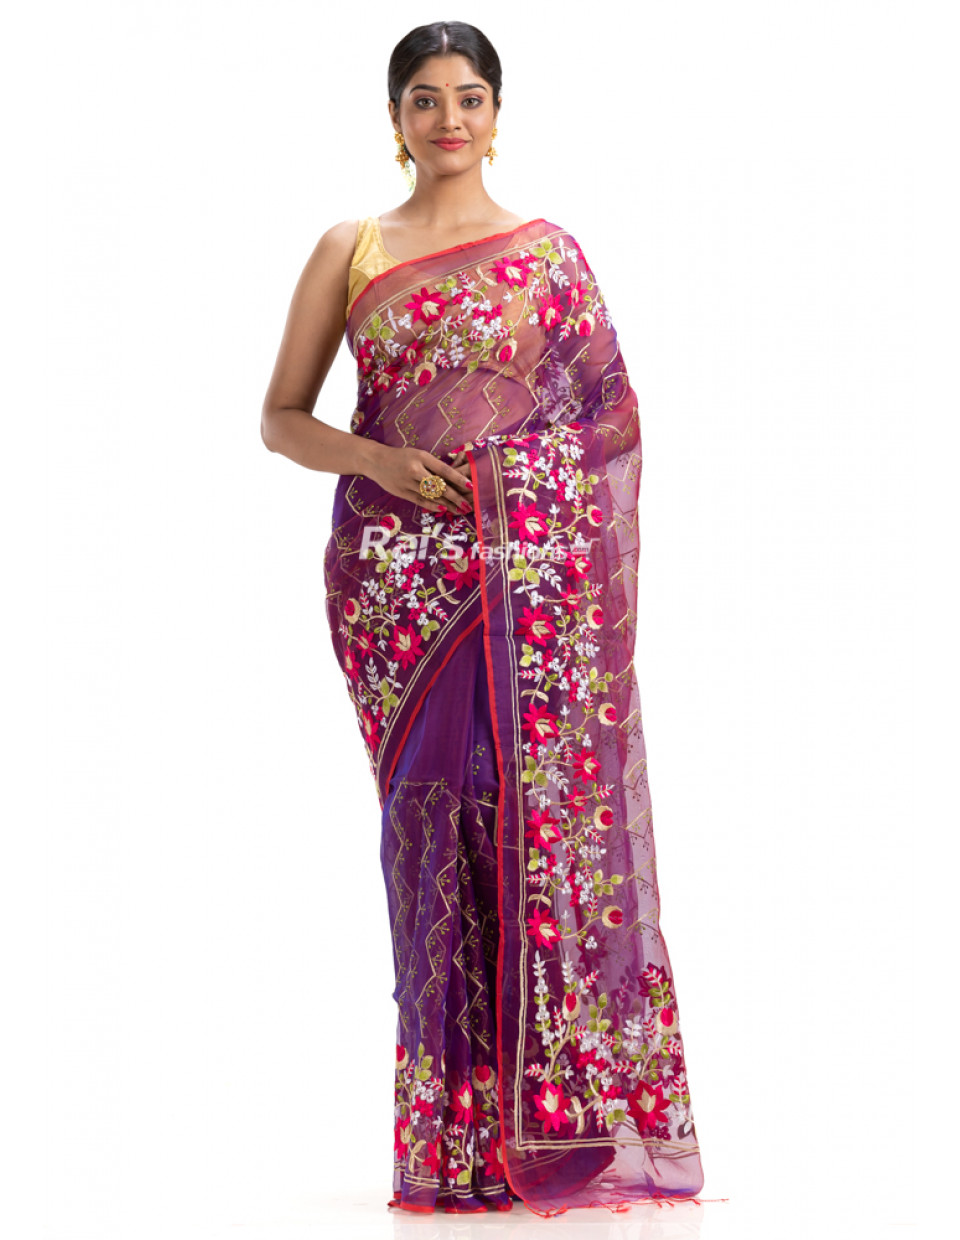 All Over Embroidery Worked Muslin Silk Saree (KR1756)